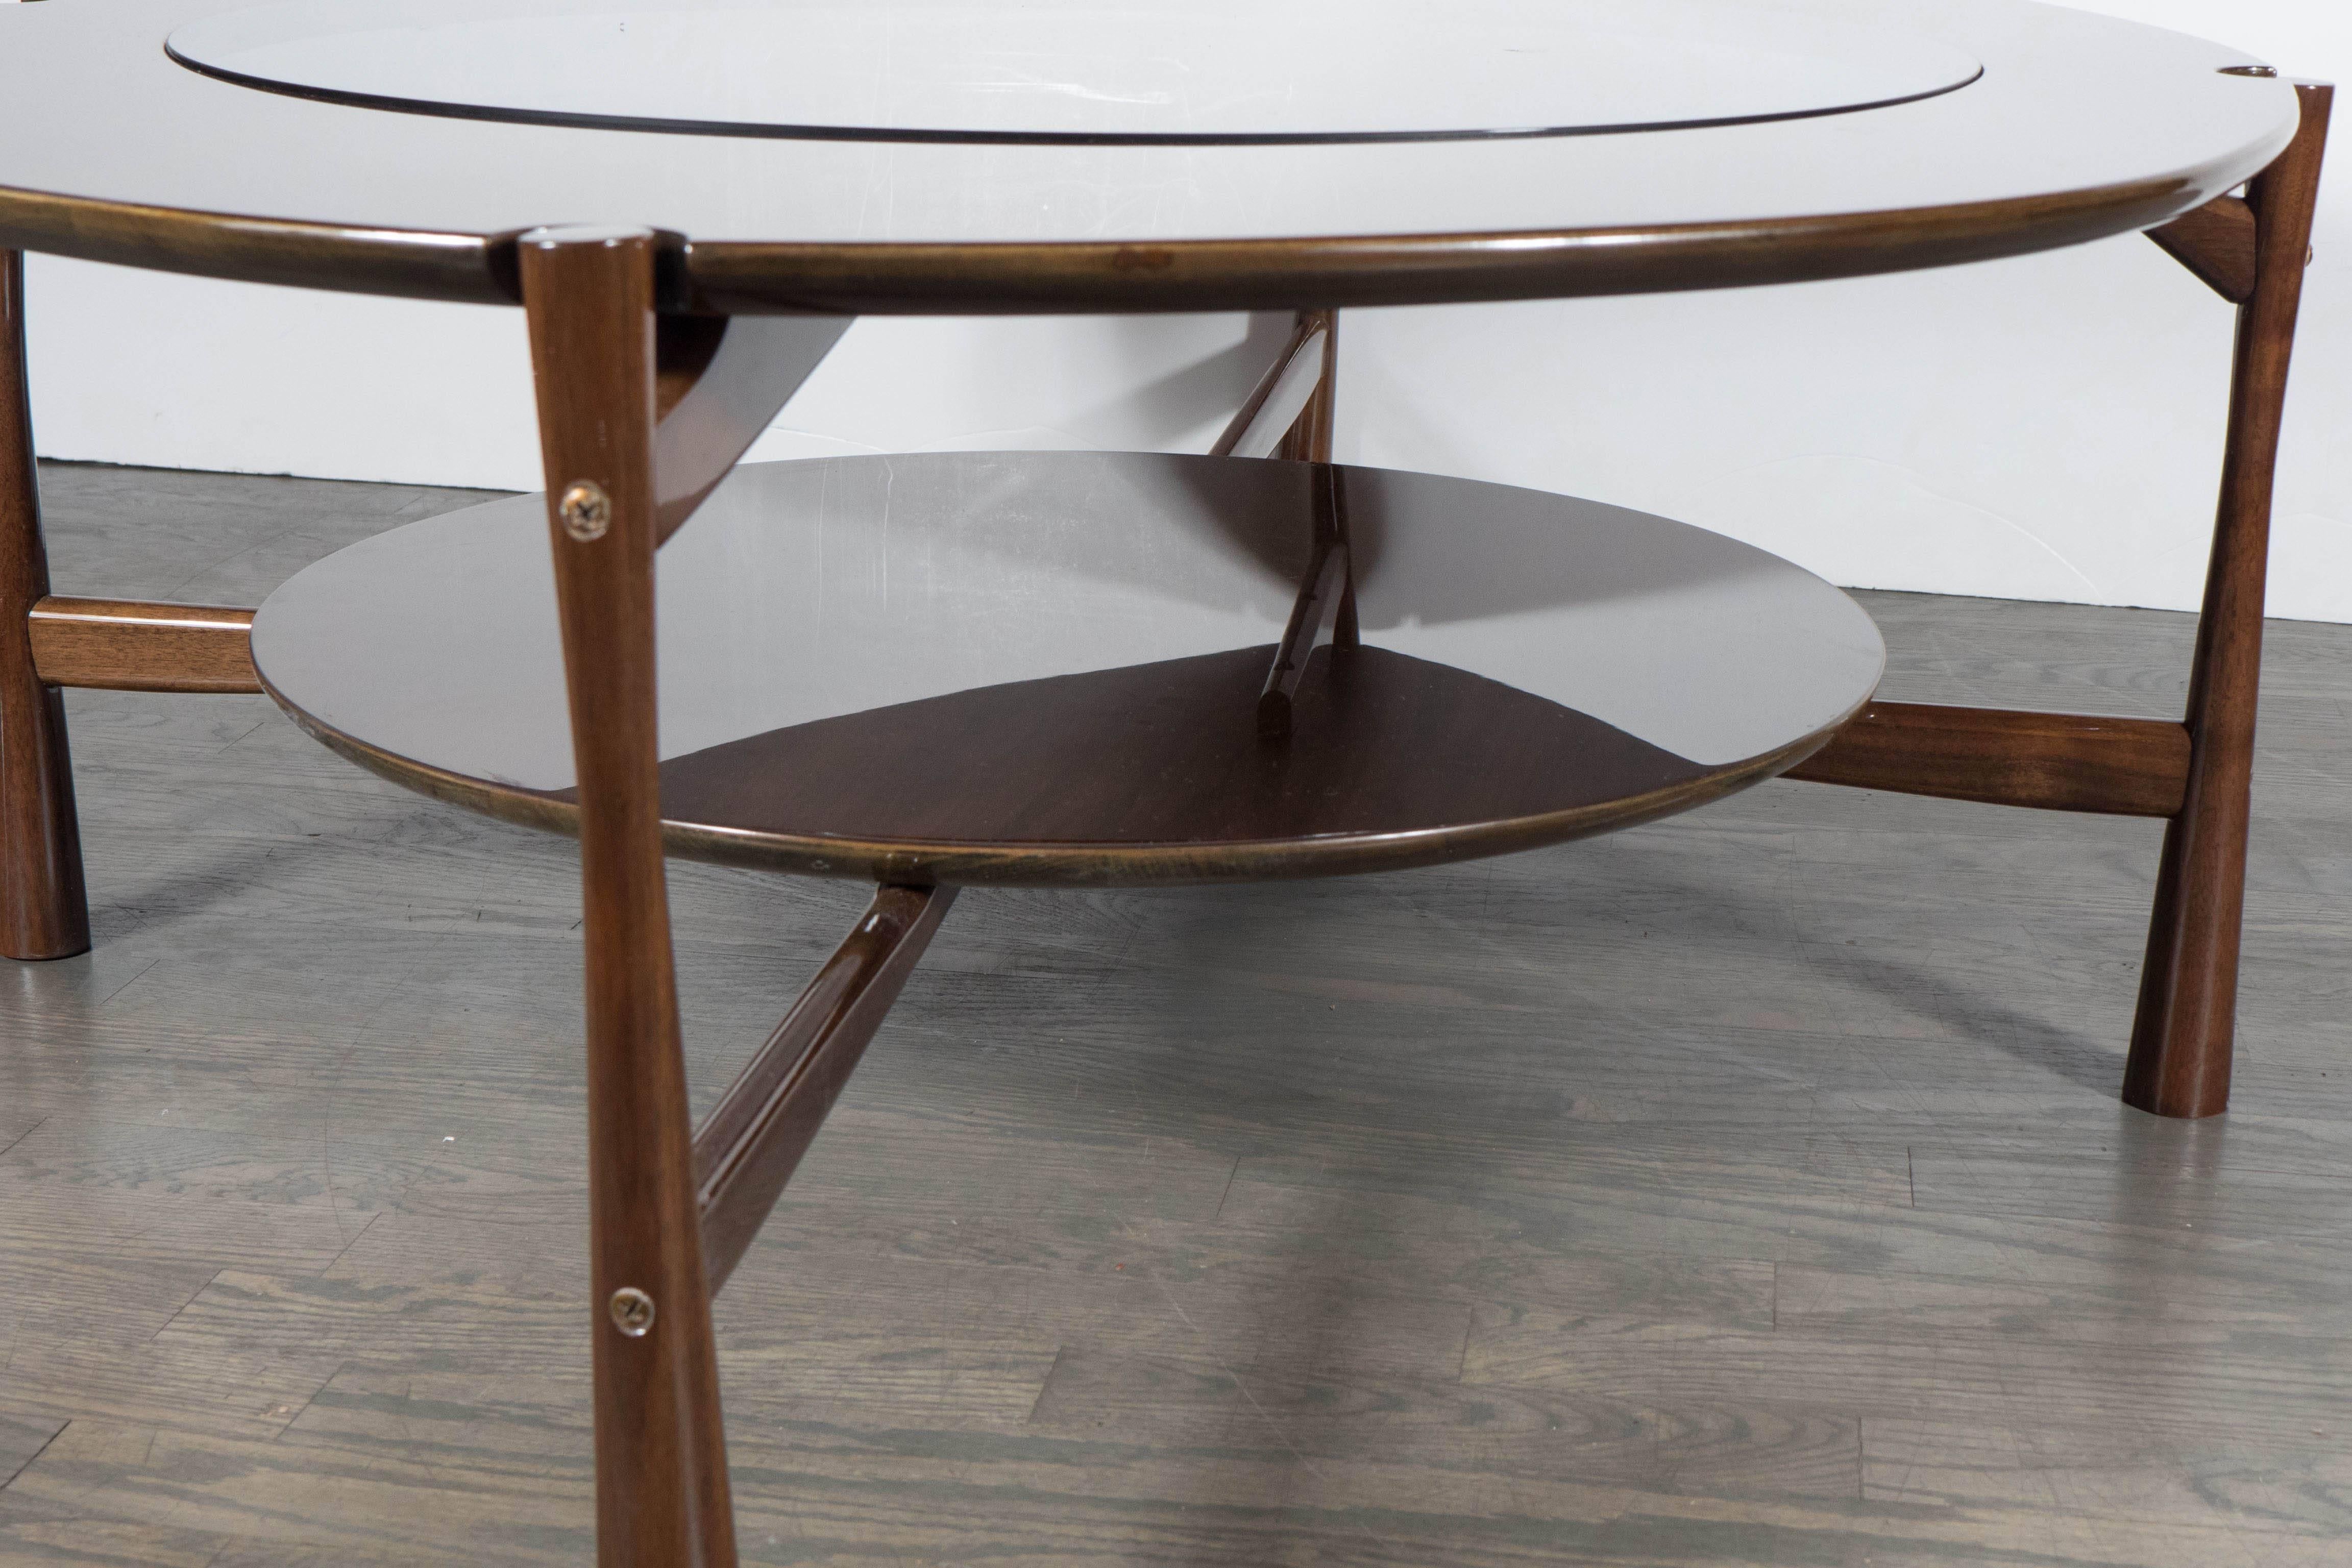 Mid-20th Century Sculptural Mid-Century Teardrop Cocktail Table in Walnut and Smoked Glass